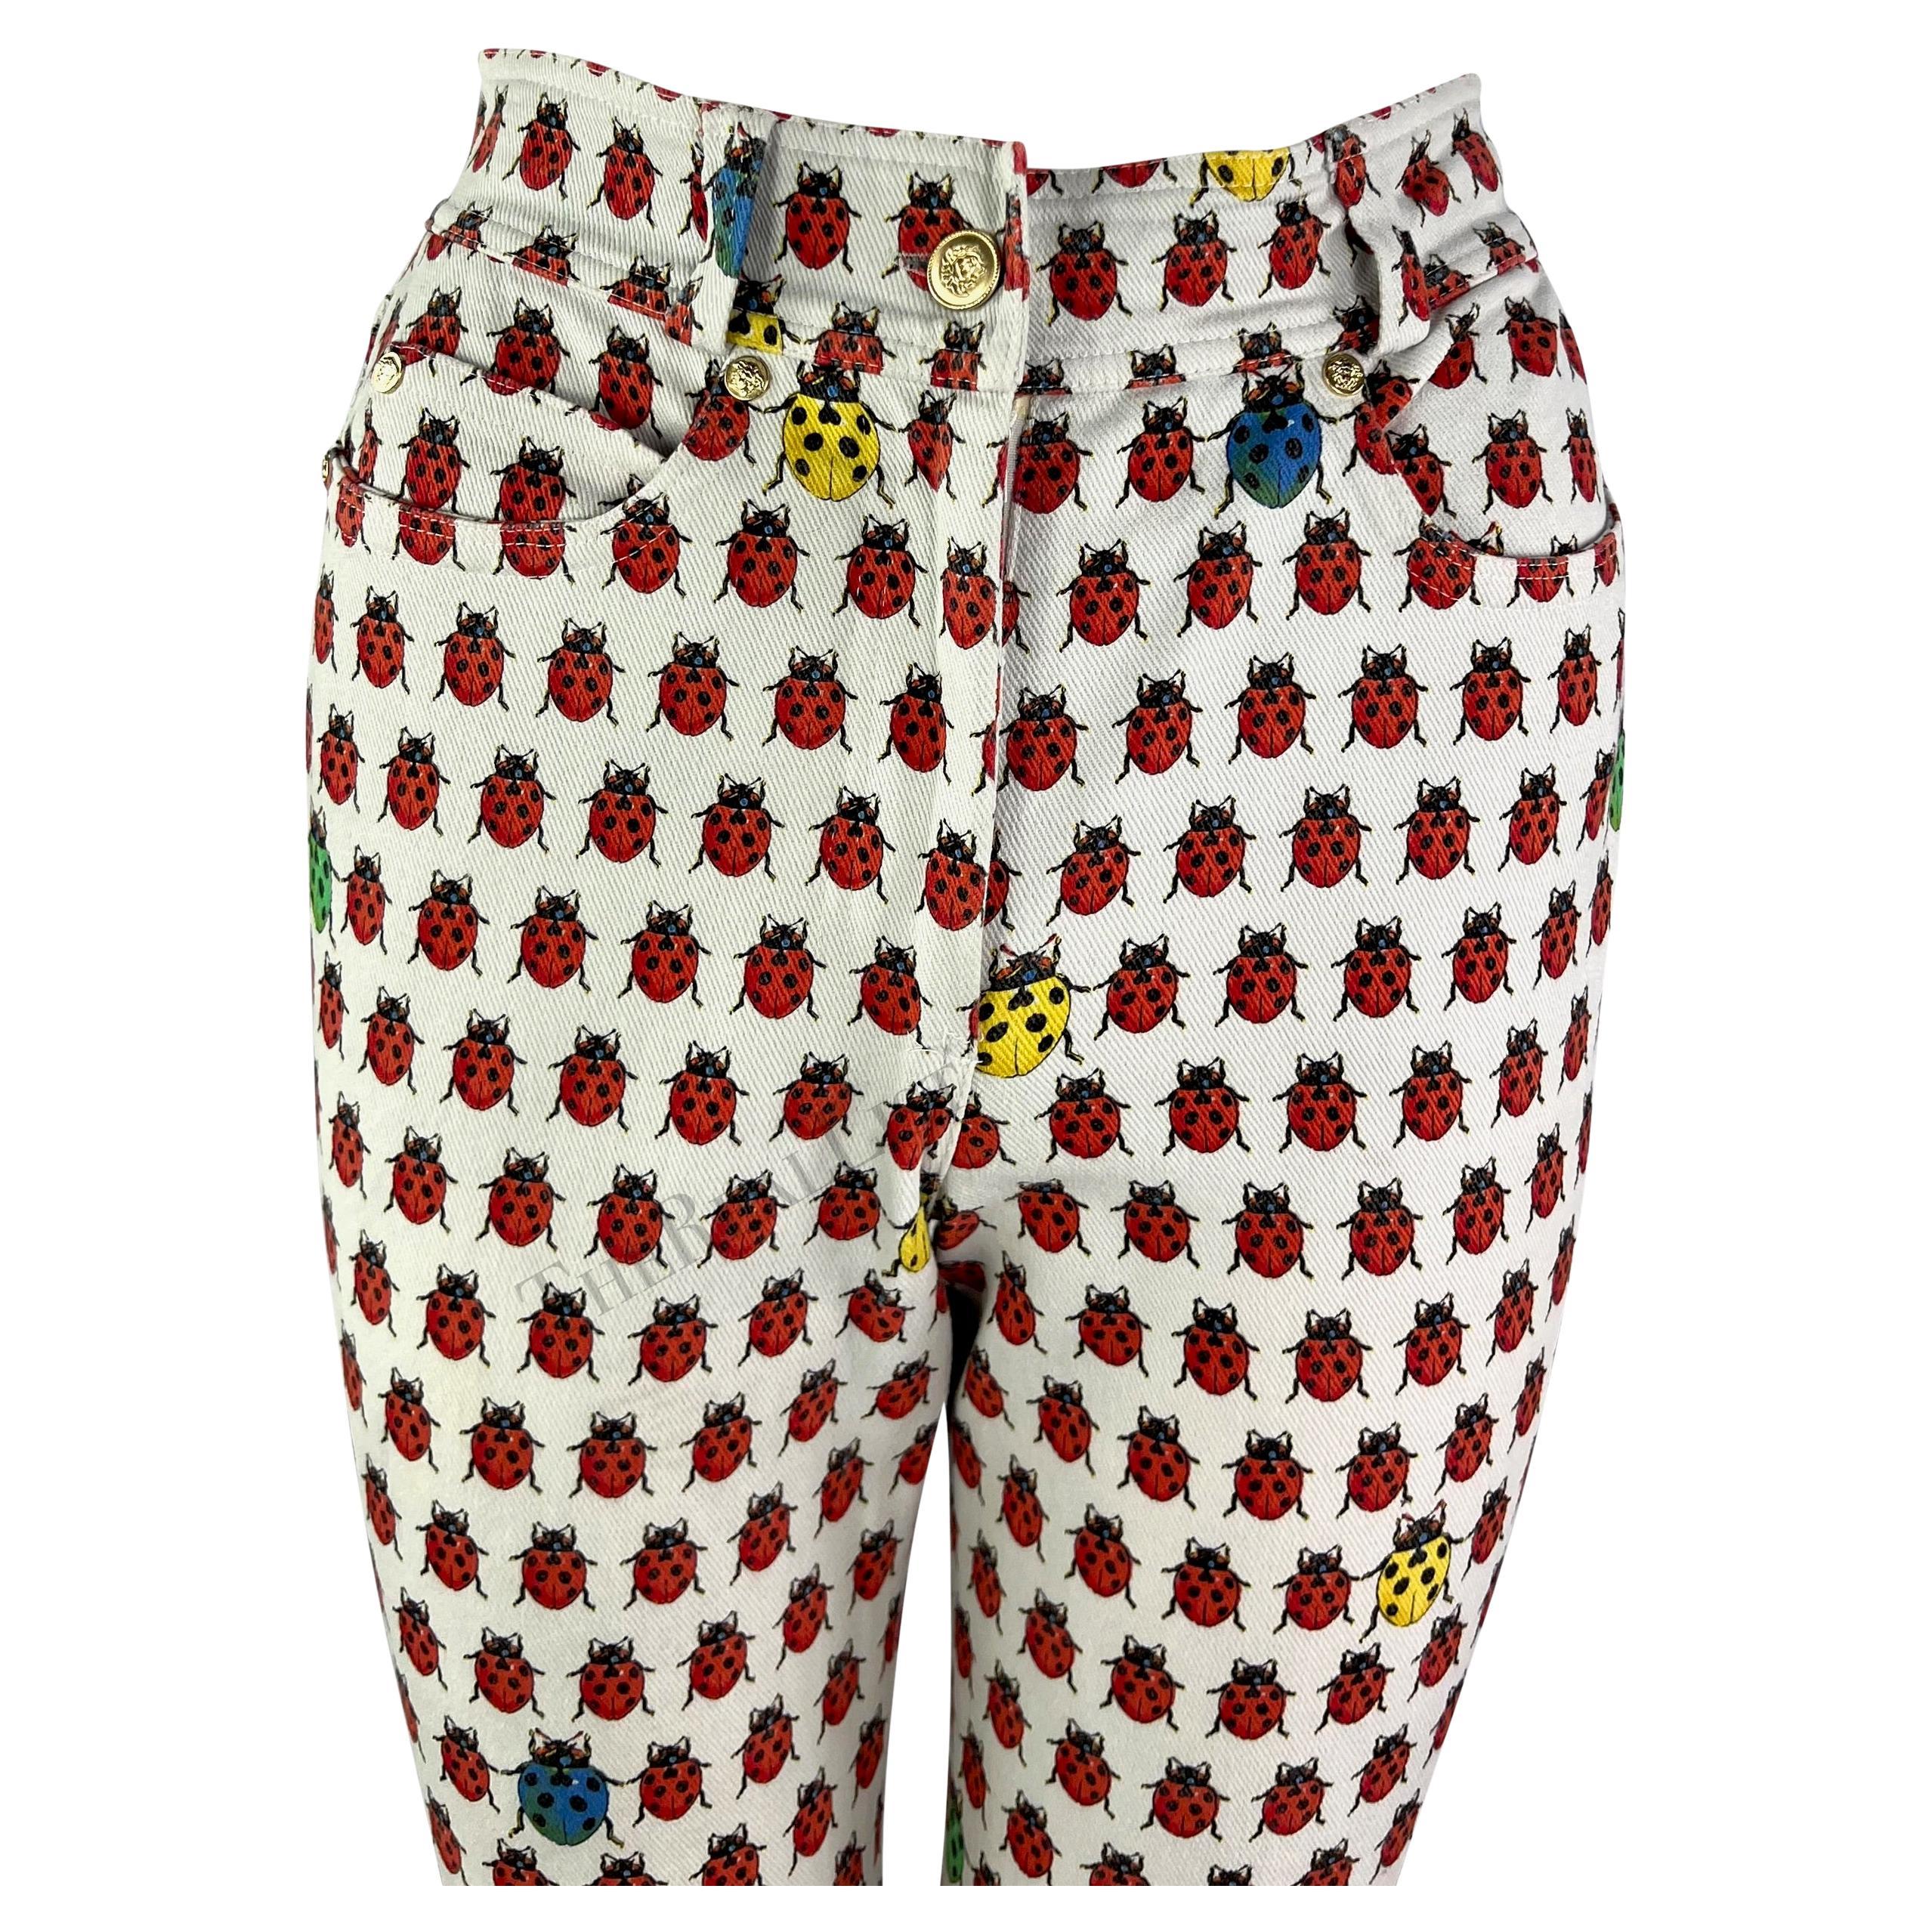 Presenting a pair of white ladybug print Gianni Versace jeans, designed by Gianni Versace. From the Spring/Summer 1995 collection, these high-waisted tapered pants are covered in multi-colored ladybugs, a print that first debuted on the season's